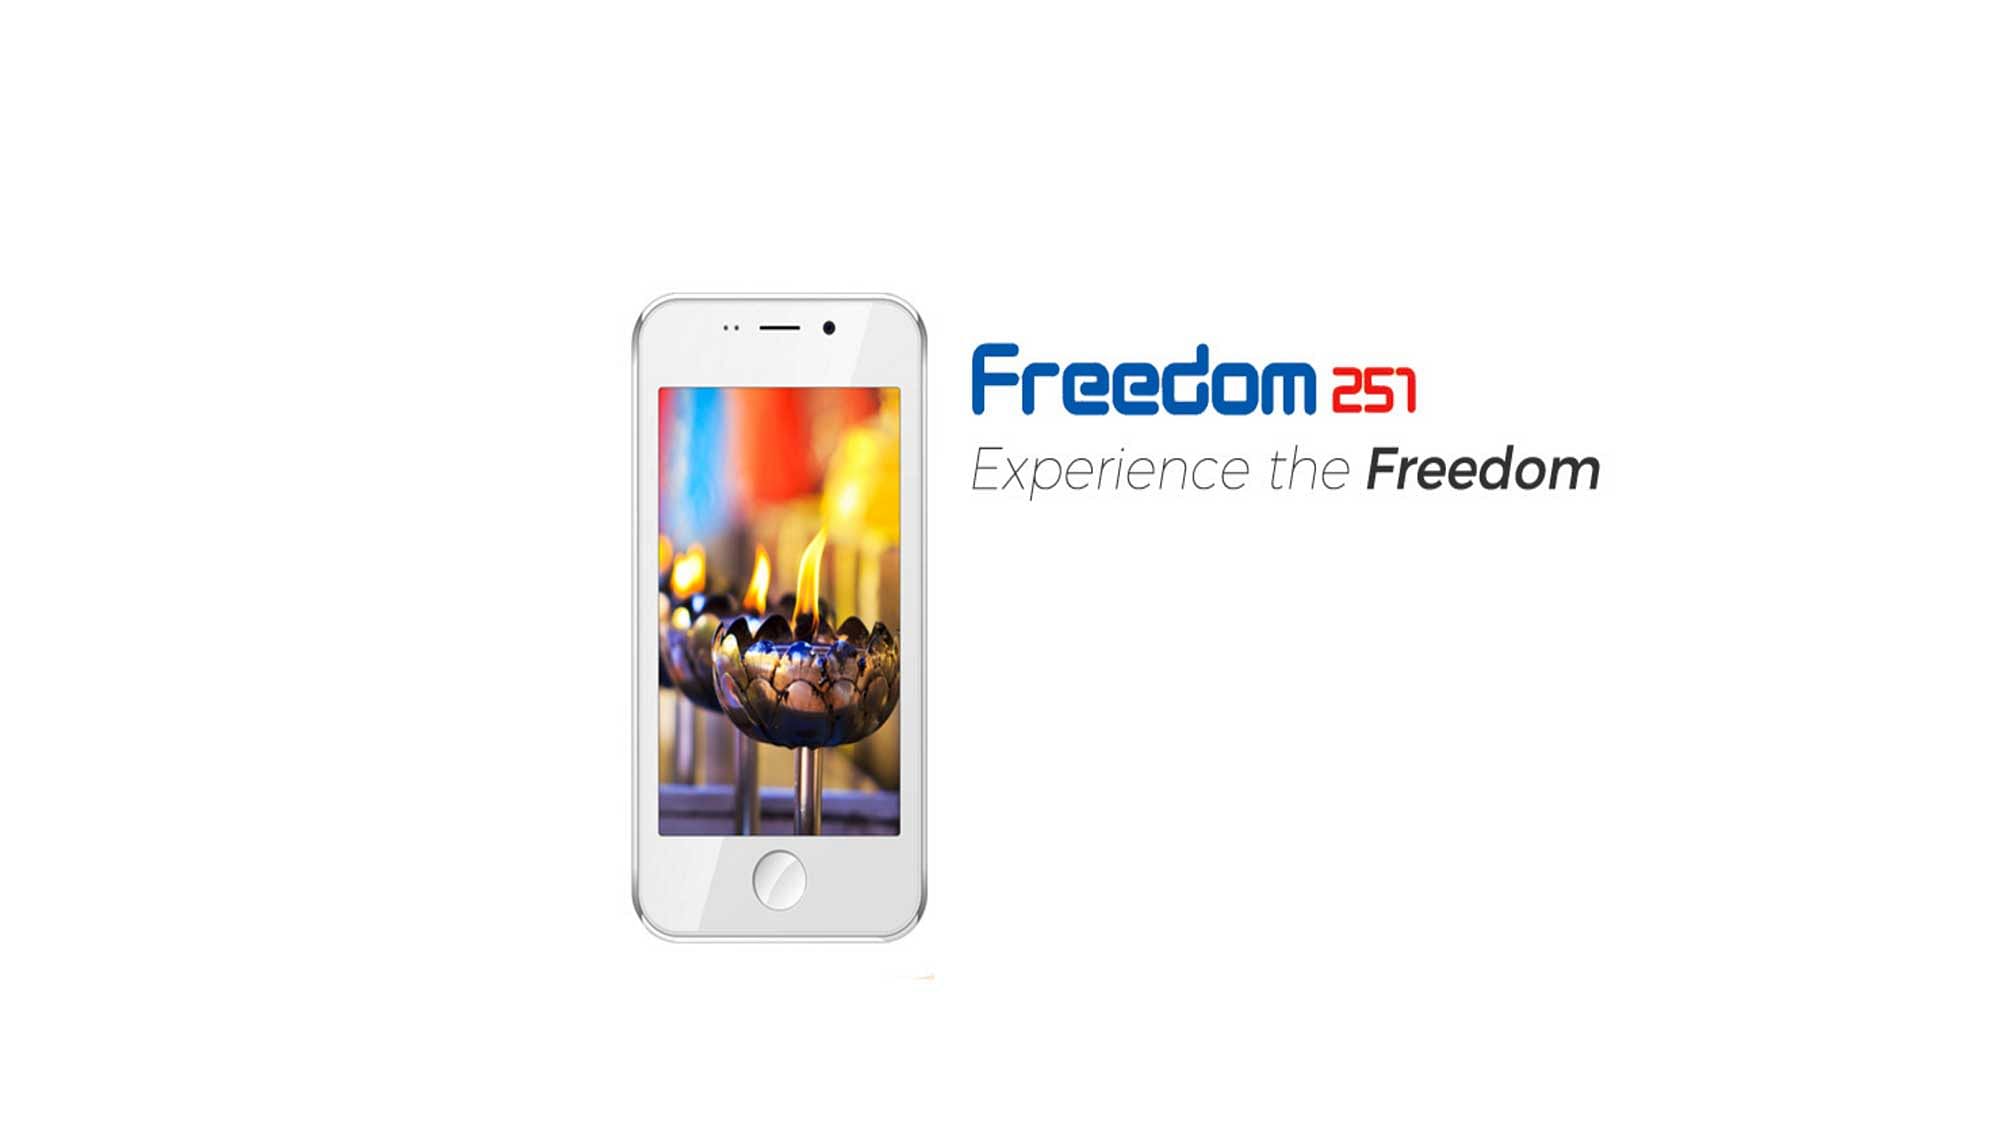 Freedom 251 delivery started, says Ringing Bells; over 2000 units delivered  | Technology News - The Indian Express